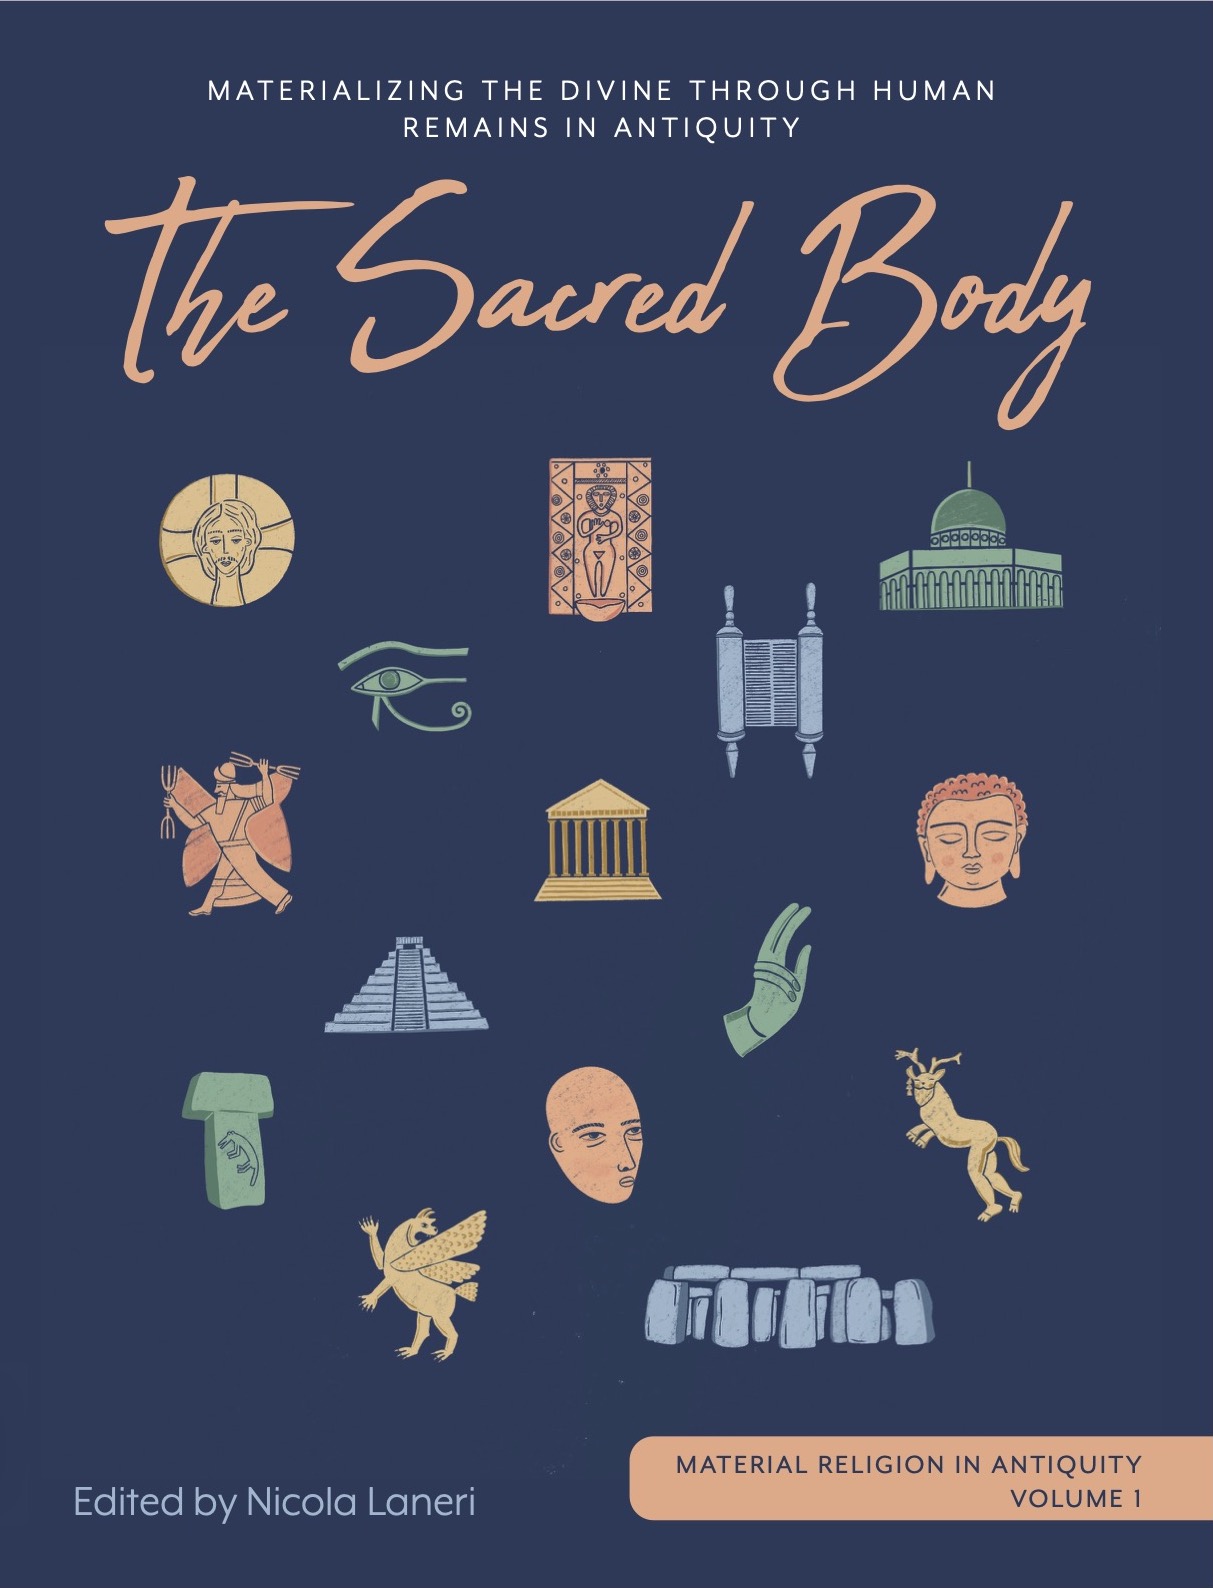 Material Religion in Antiquity 1: "The Sacred Body"